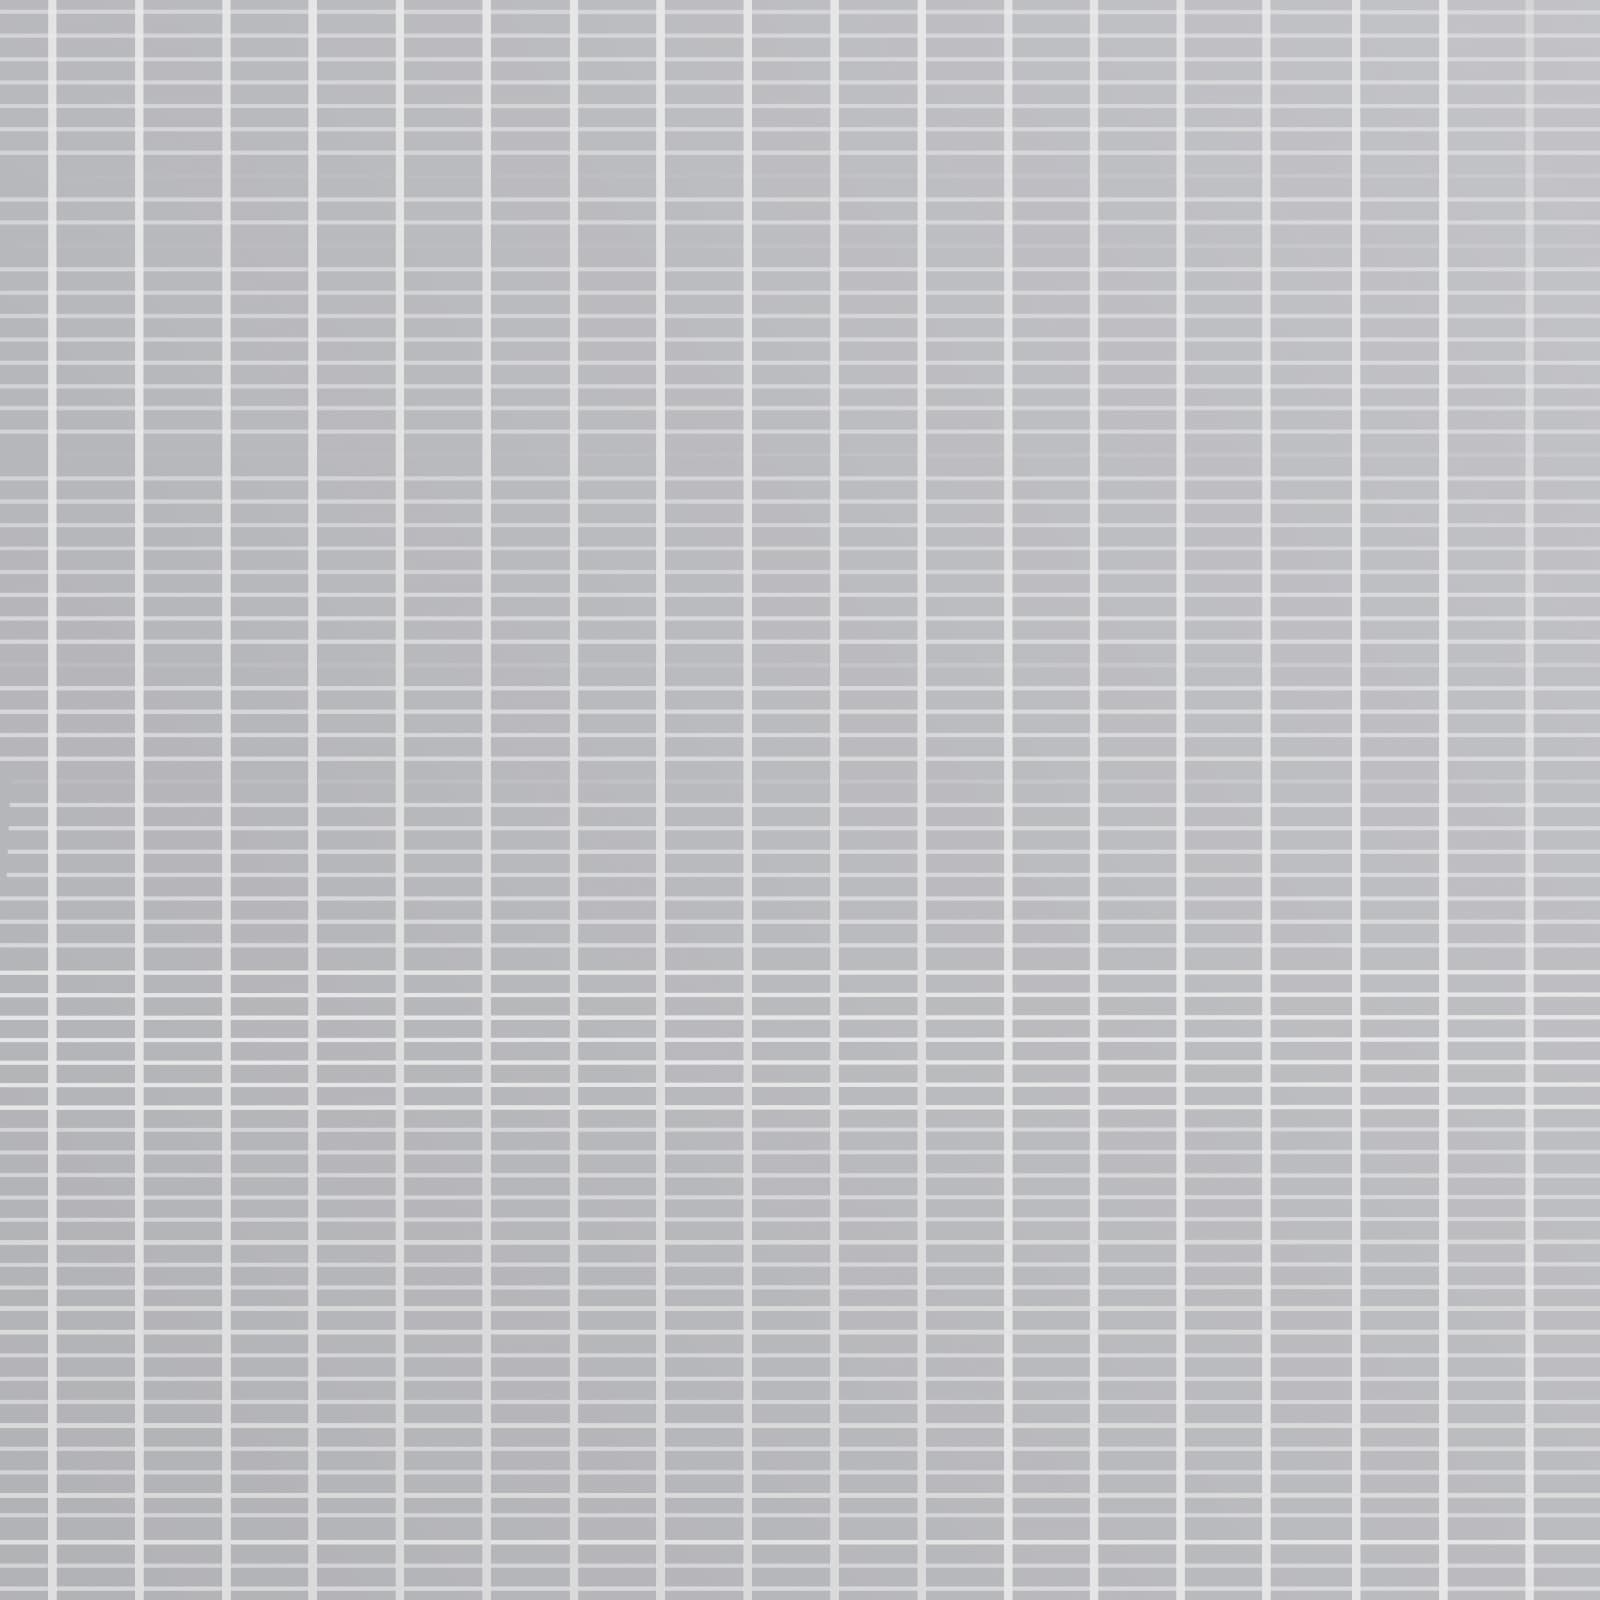 A gray and white patterned background - Grid